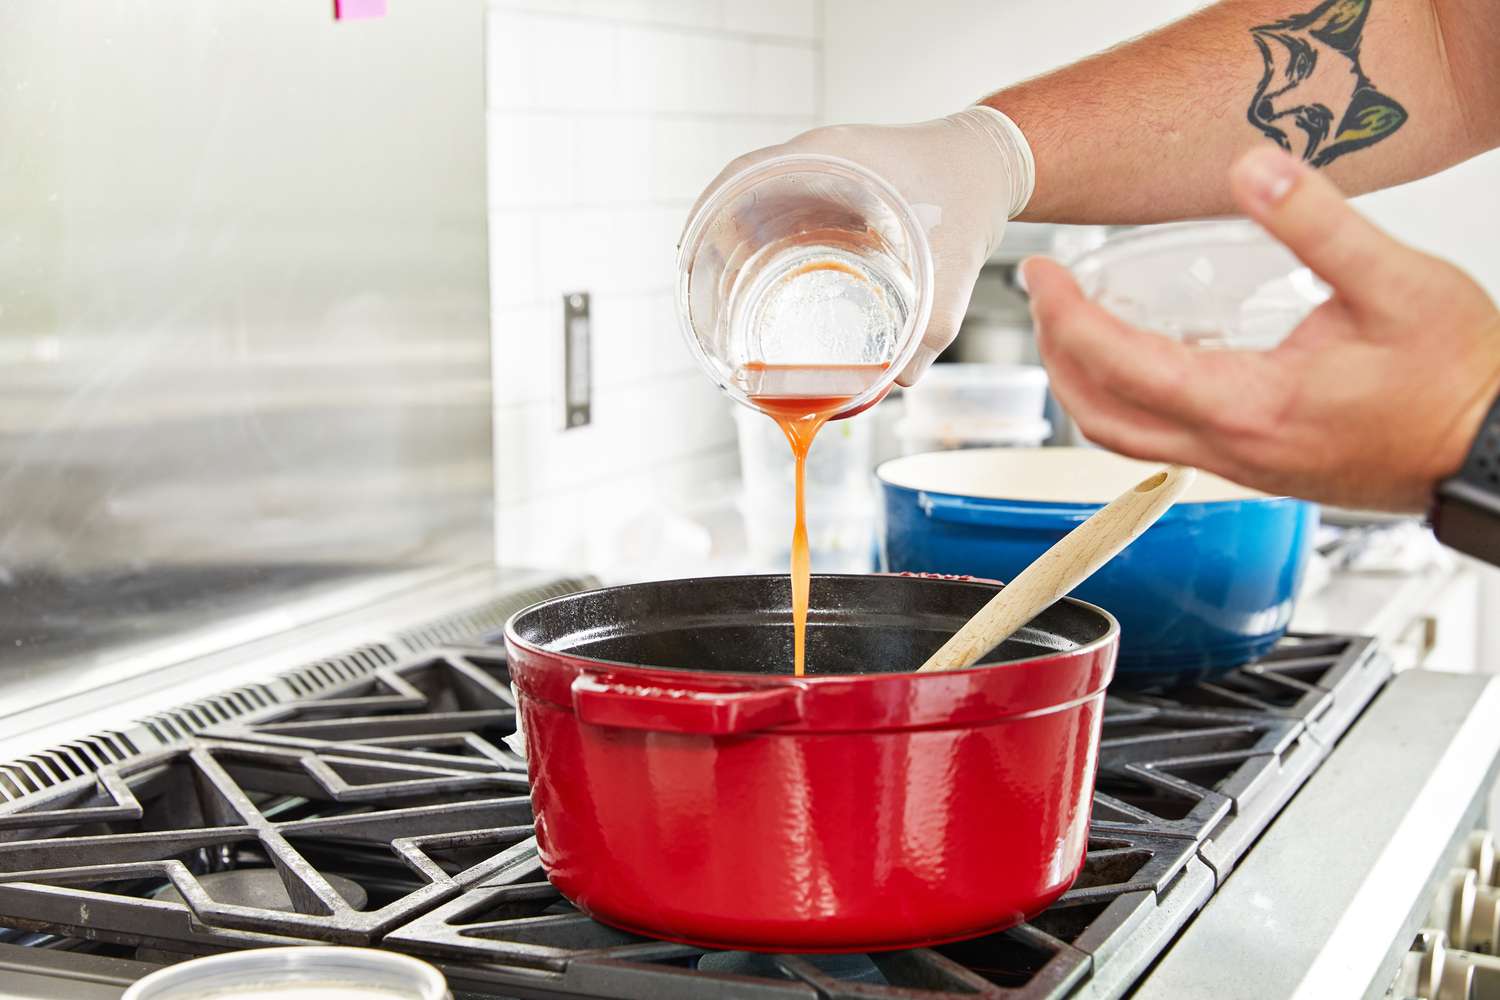 a hand pouring liquid into a red Dutch oven